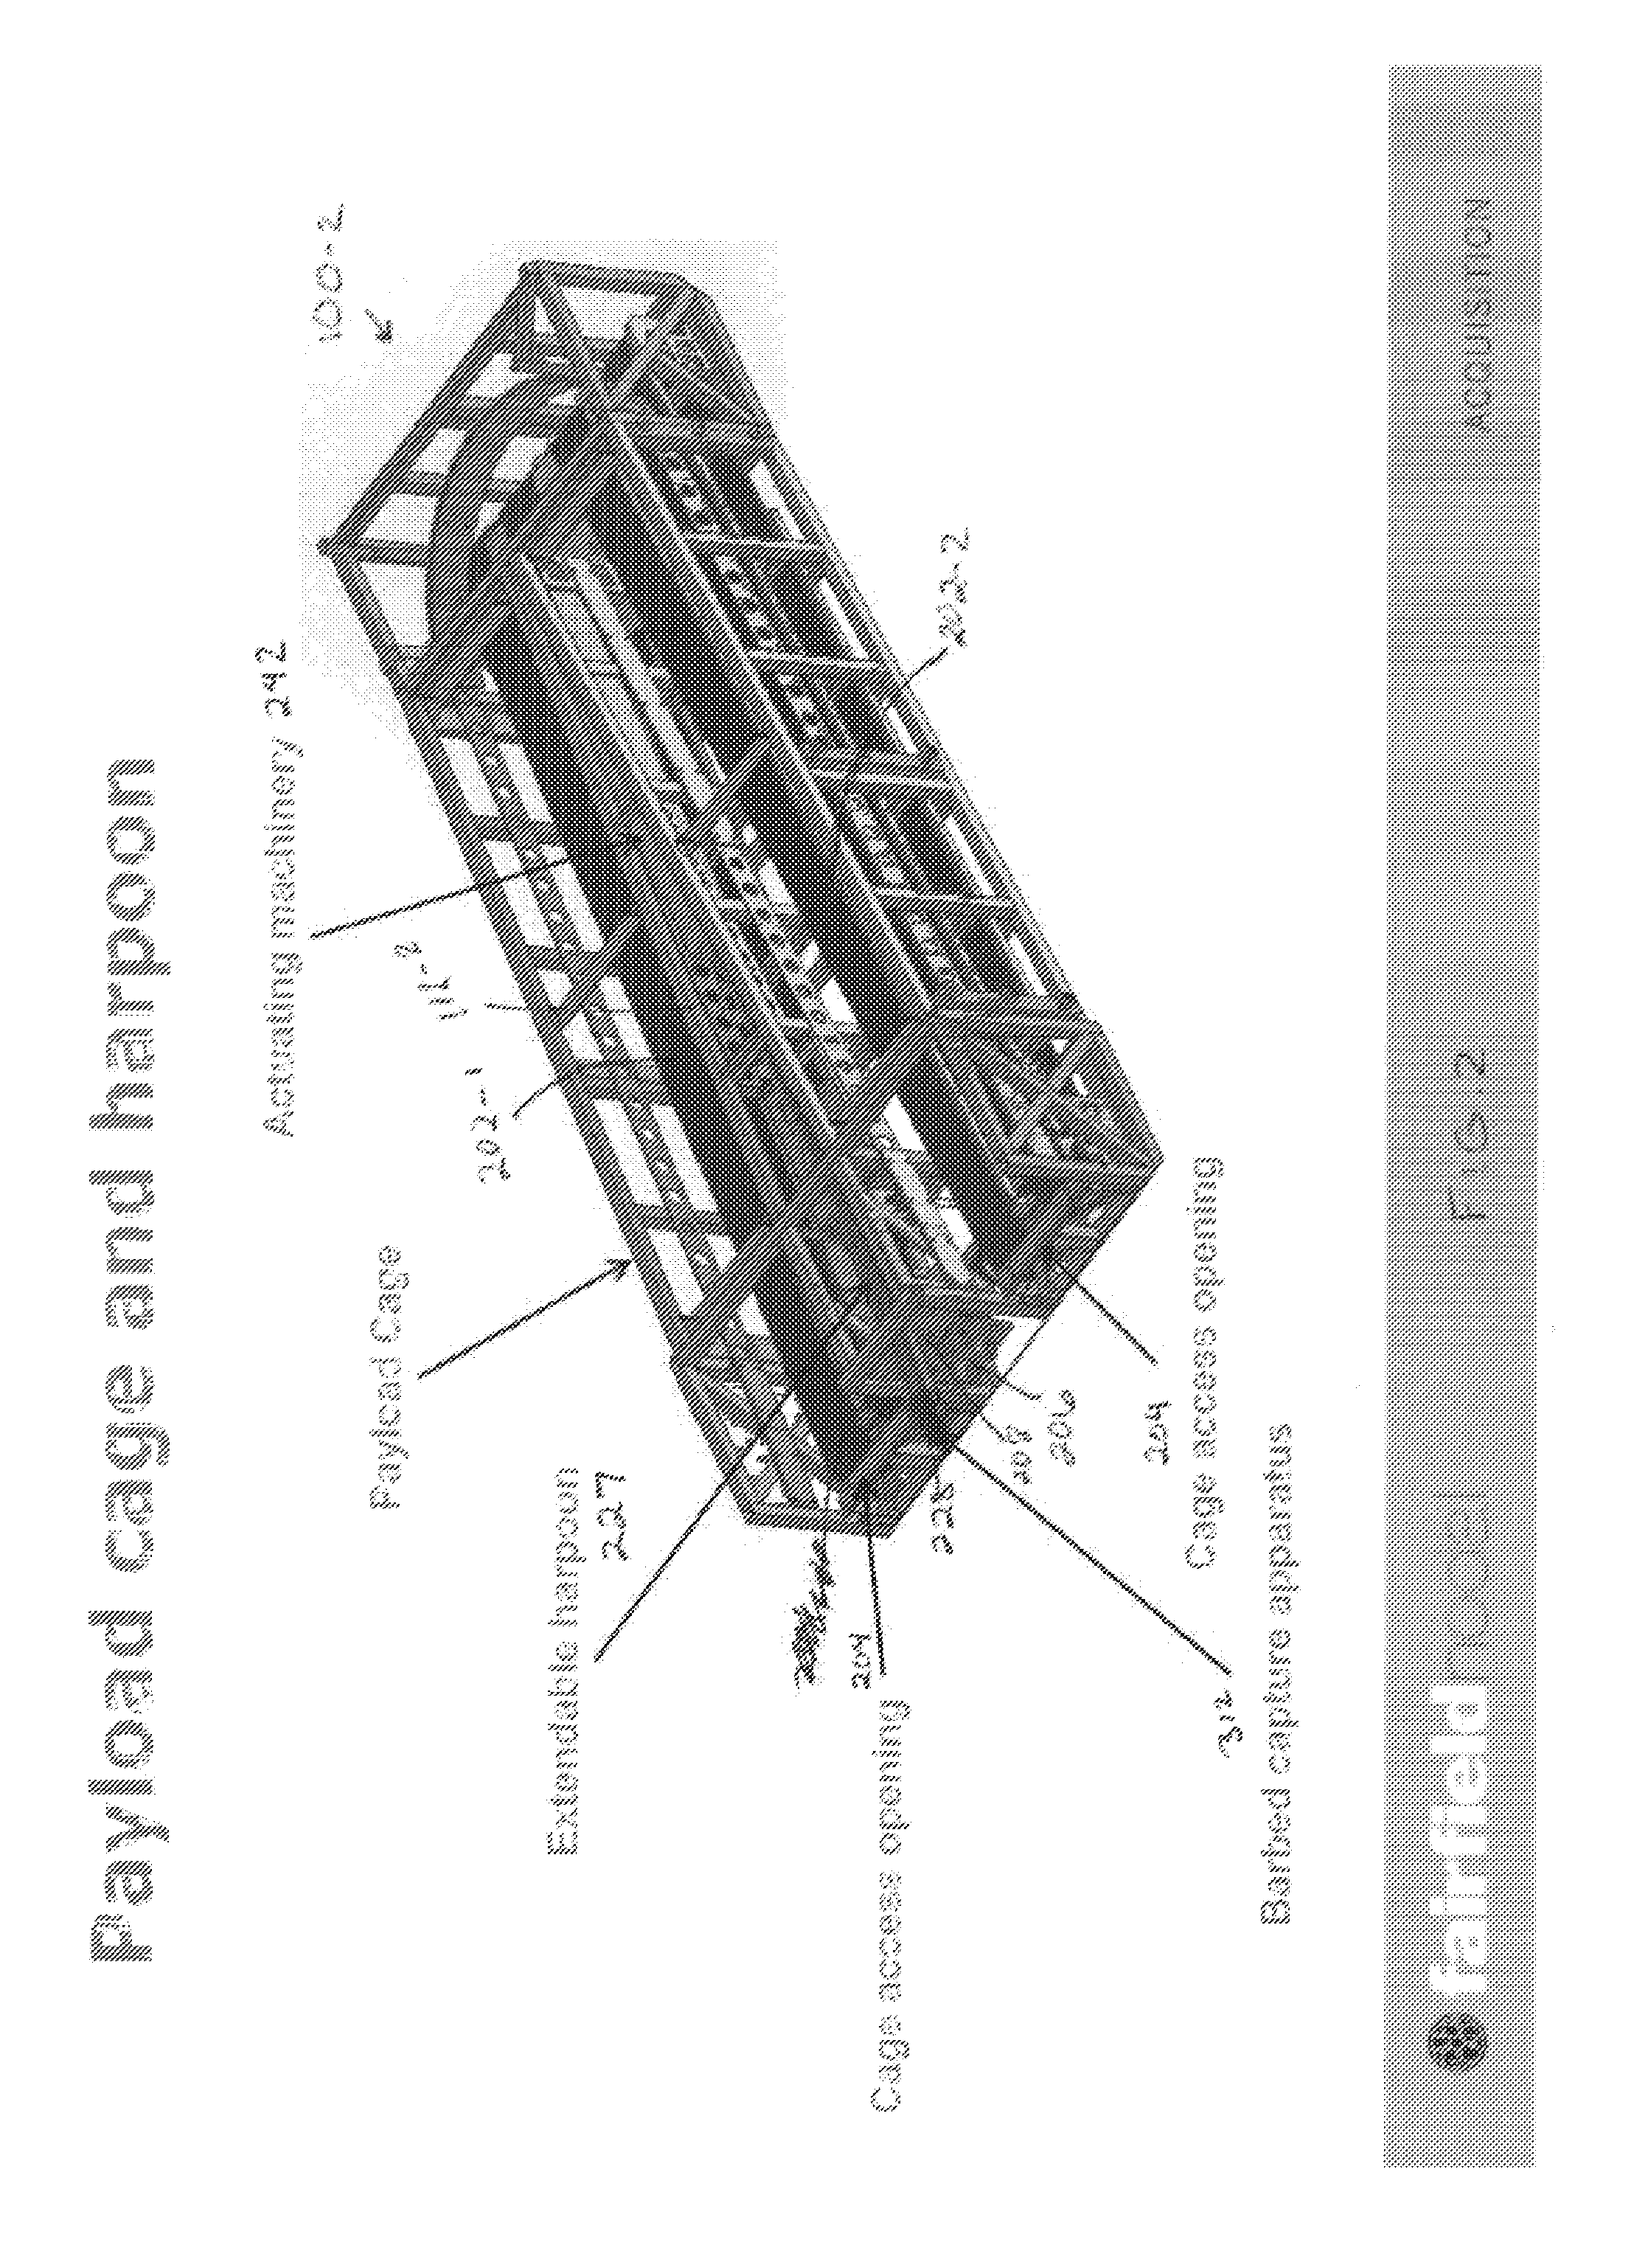 Capture and docking apparatus, method, and applications